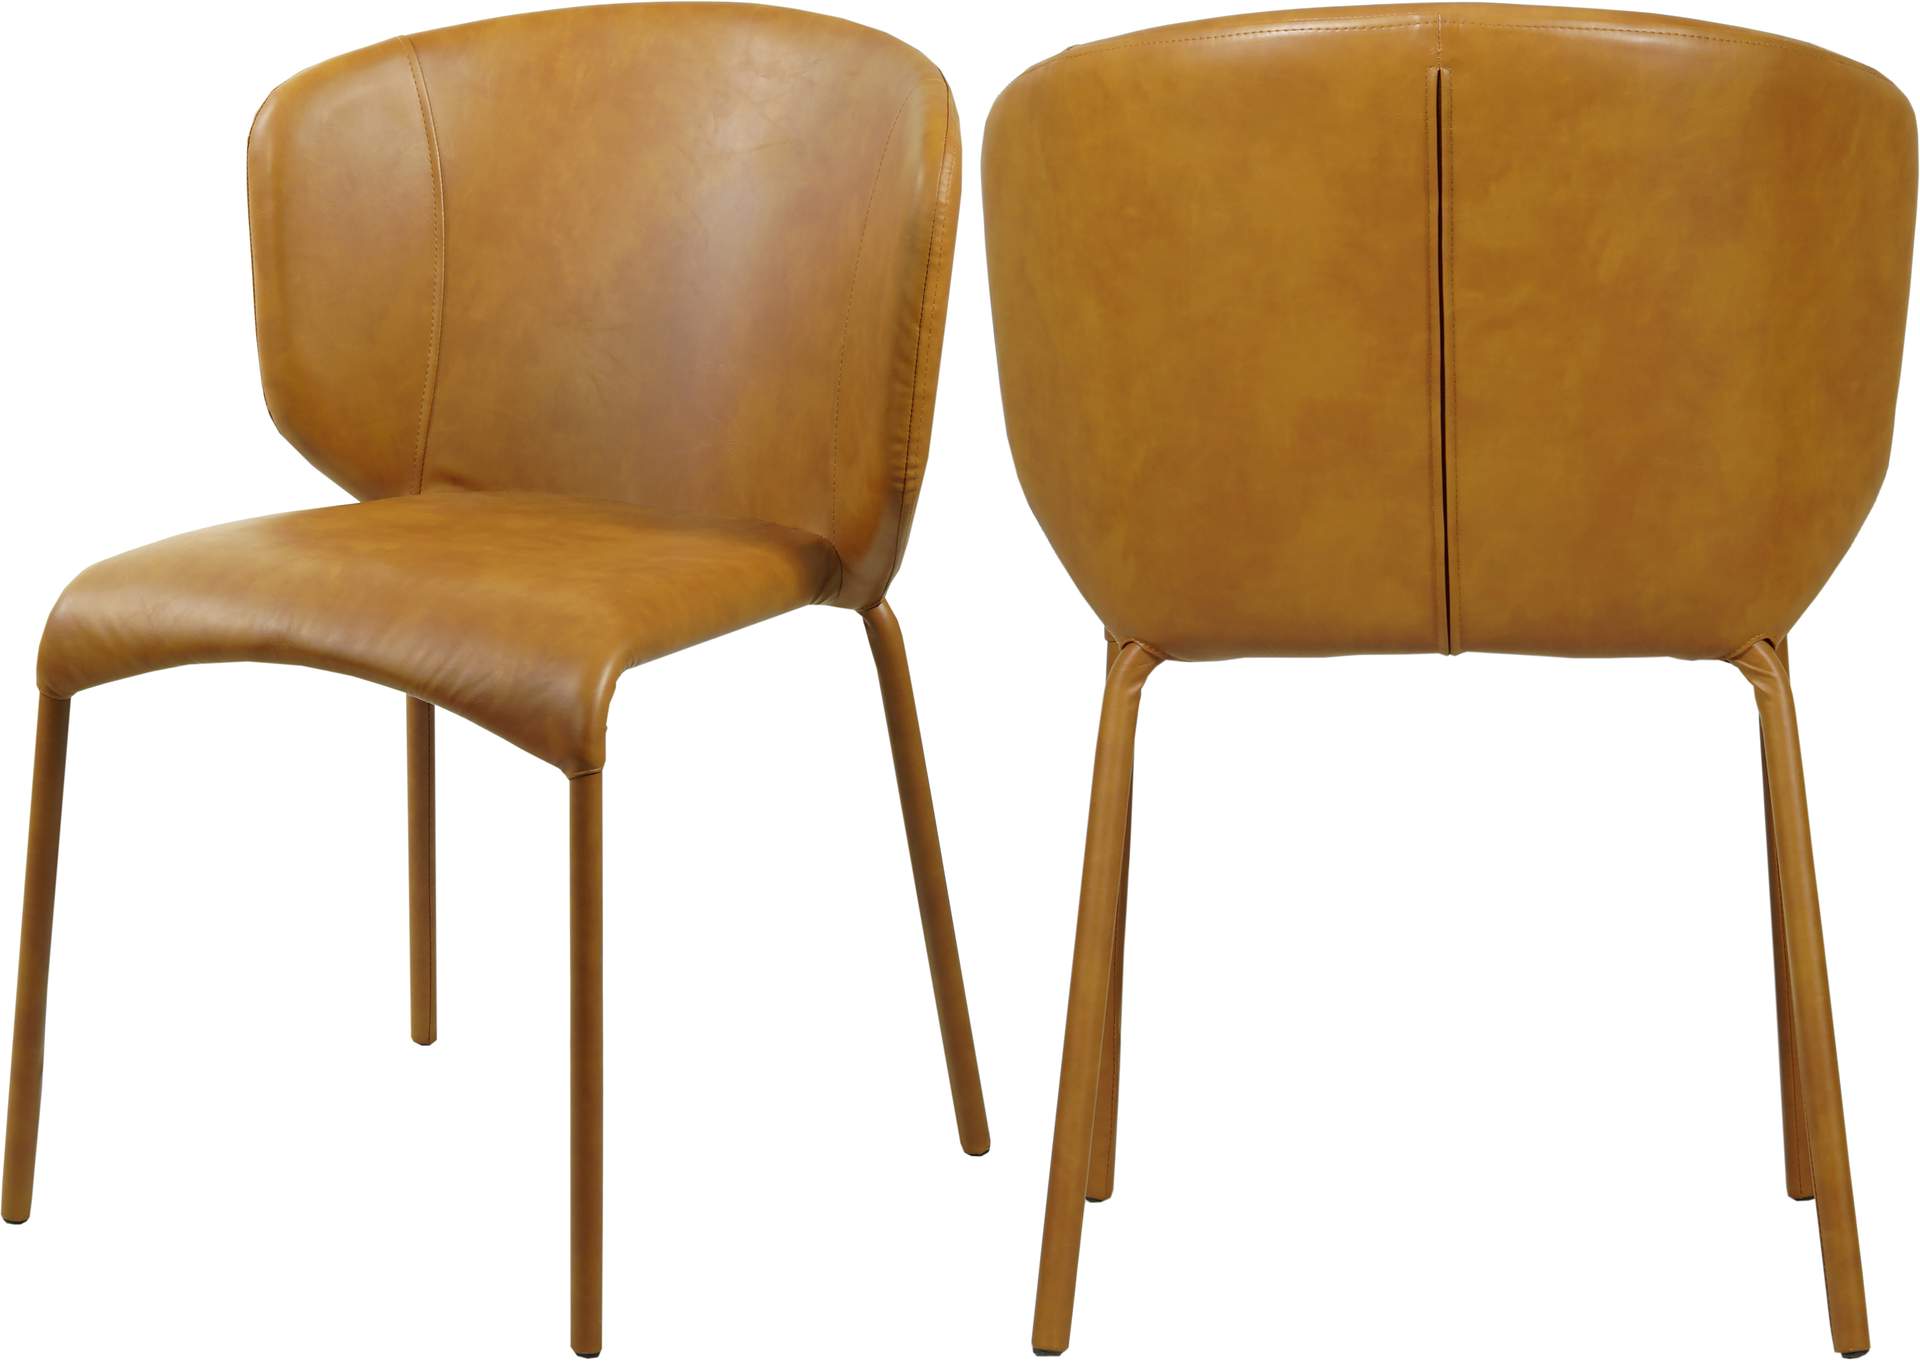 Drew Cognac Faux Leather Dining Chairs, Yellow Leather Kitchen Chairs